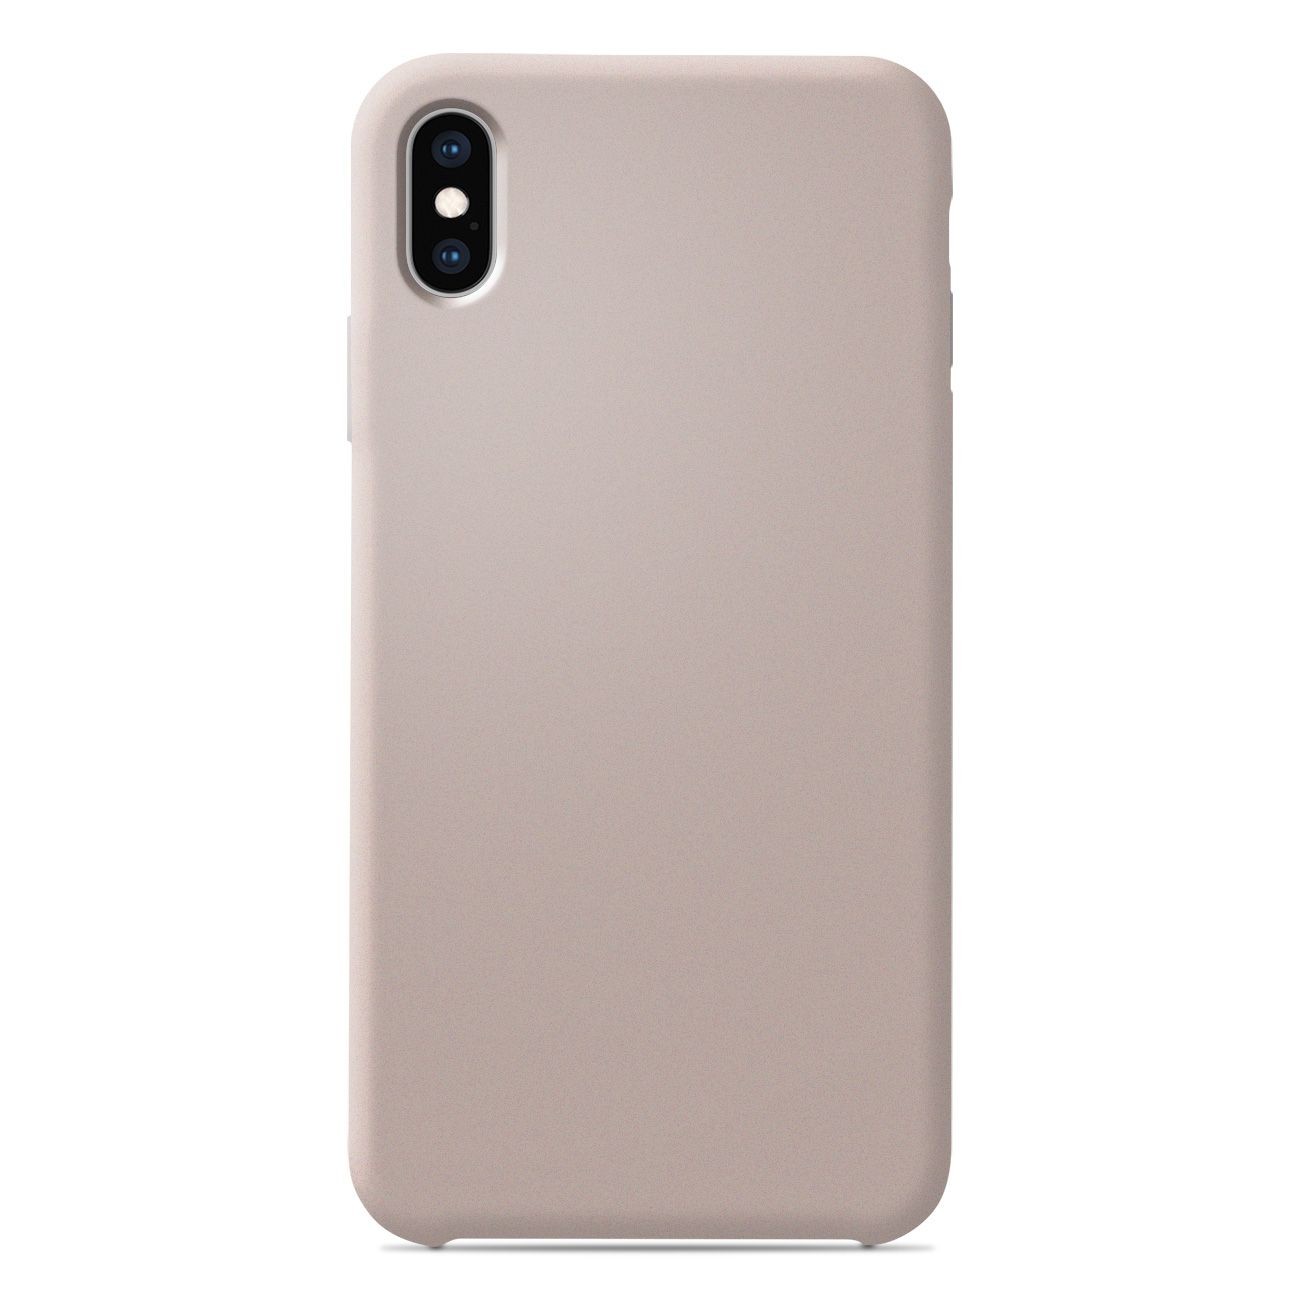 Coque silicone unie Soft Touch Sable rosé compatible Apple iPhone X iPhone XS